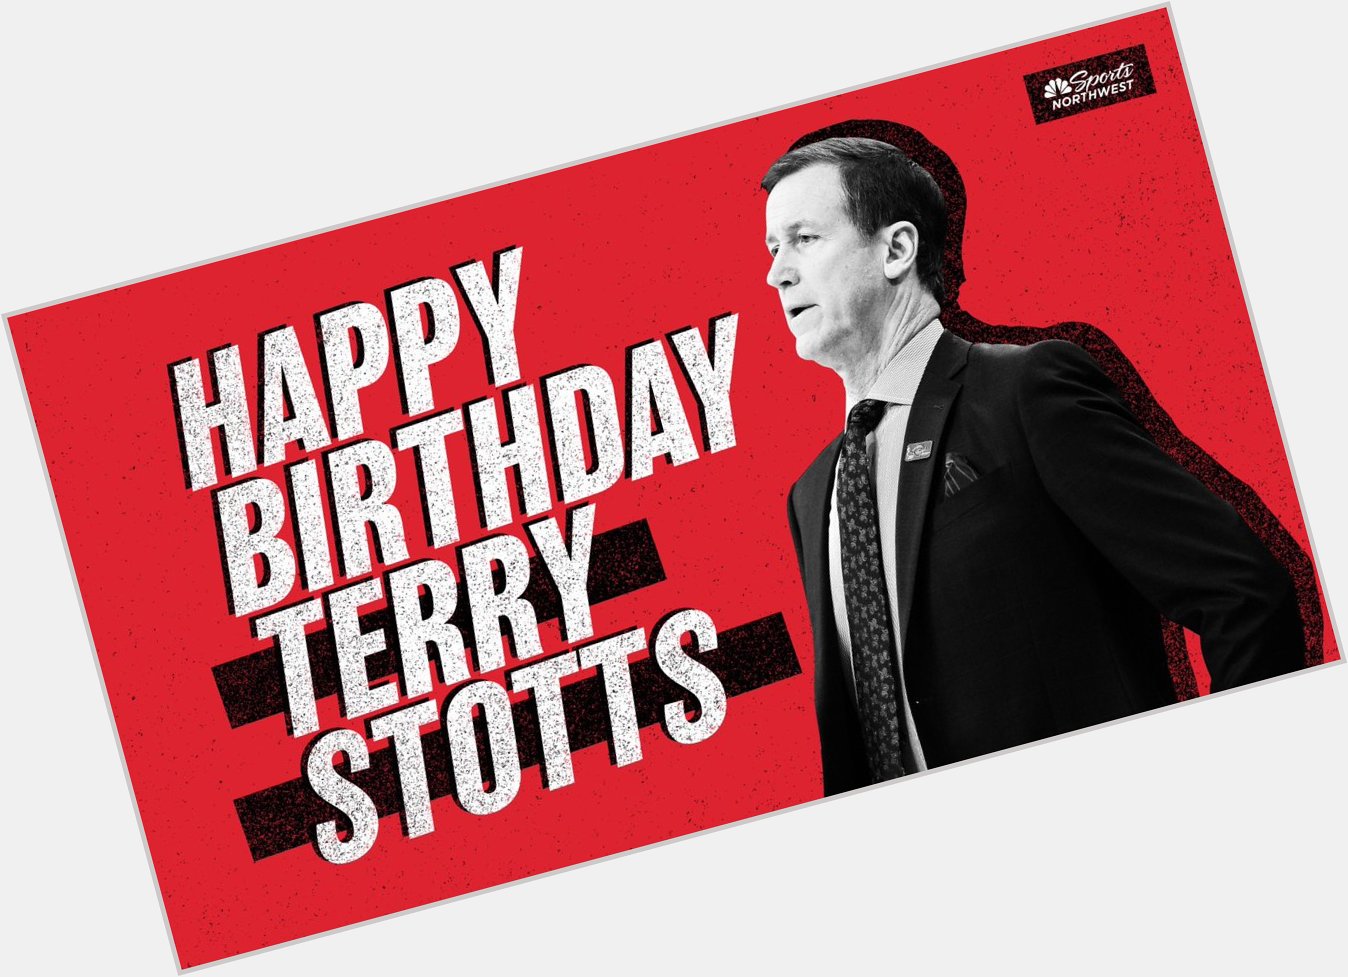 Don t be a turkey! Join us in wishing head coach Terry Stotts a Happy Birthday! 